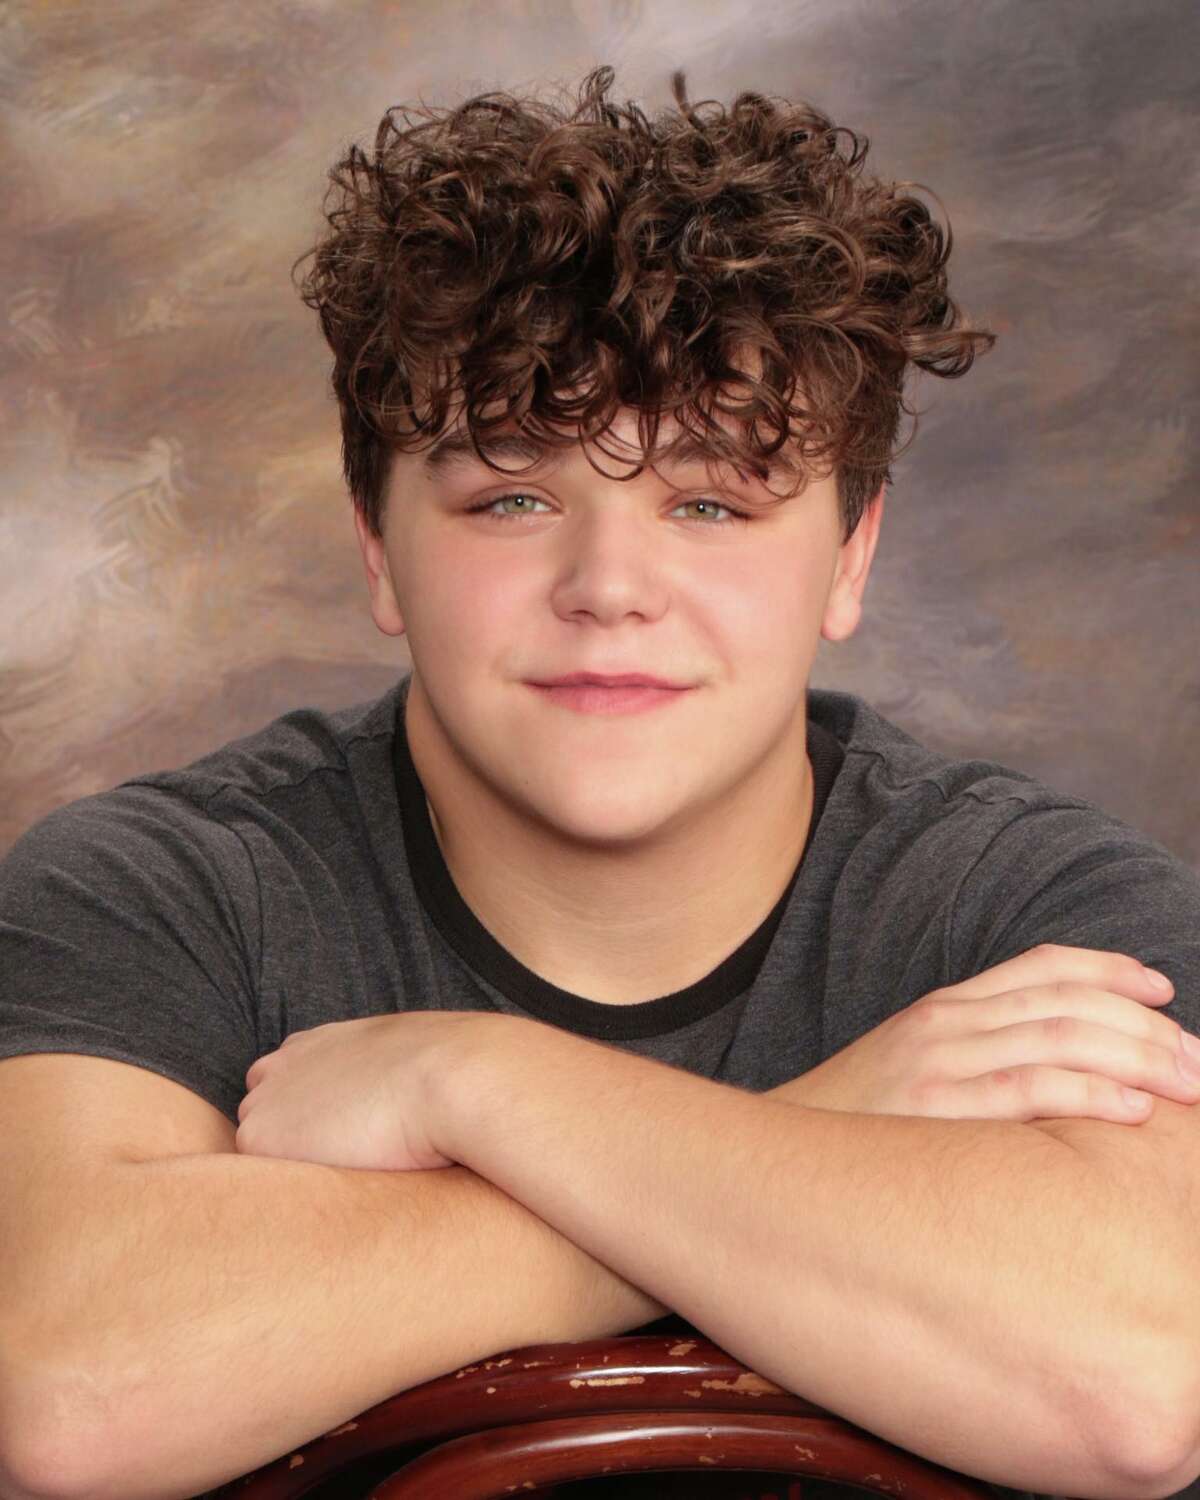 Noah Thompson, 17, of Amenia, drowned at Iron Mine Pond in Taconic State Park on Friday, Feb. 10, 2022. His mother said he “loved so hard and was loved by so many.”